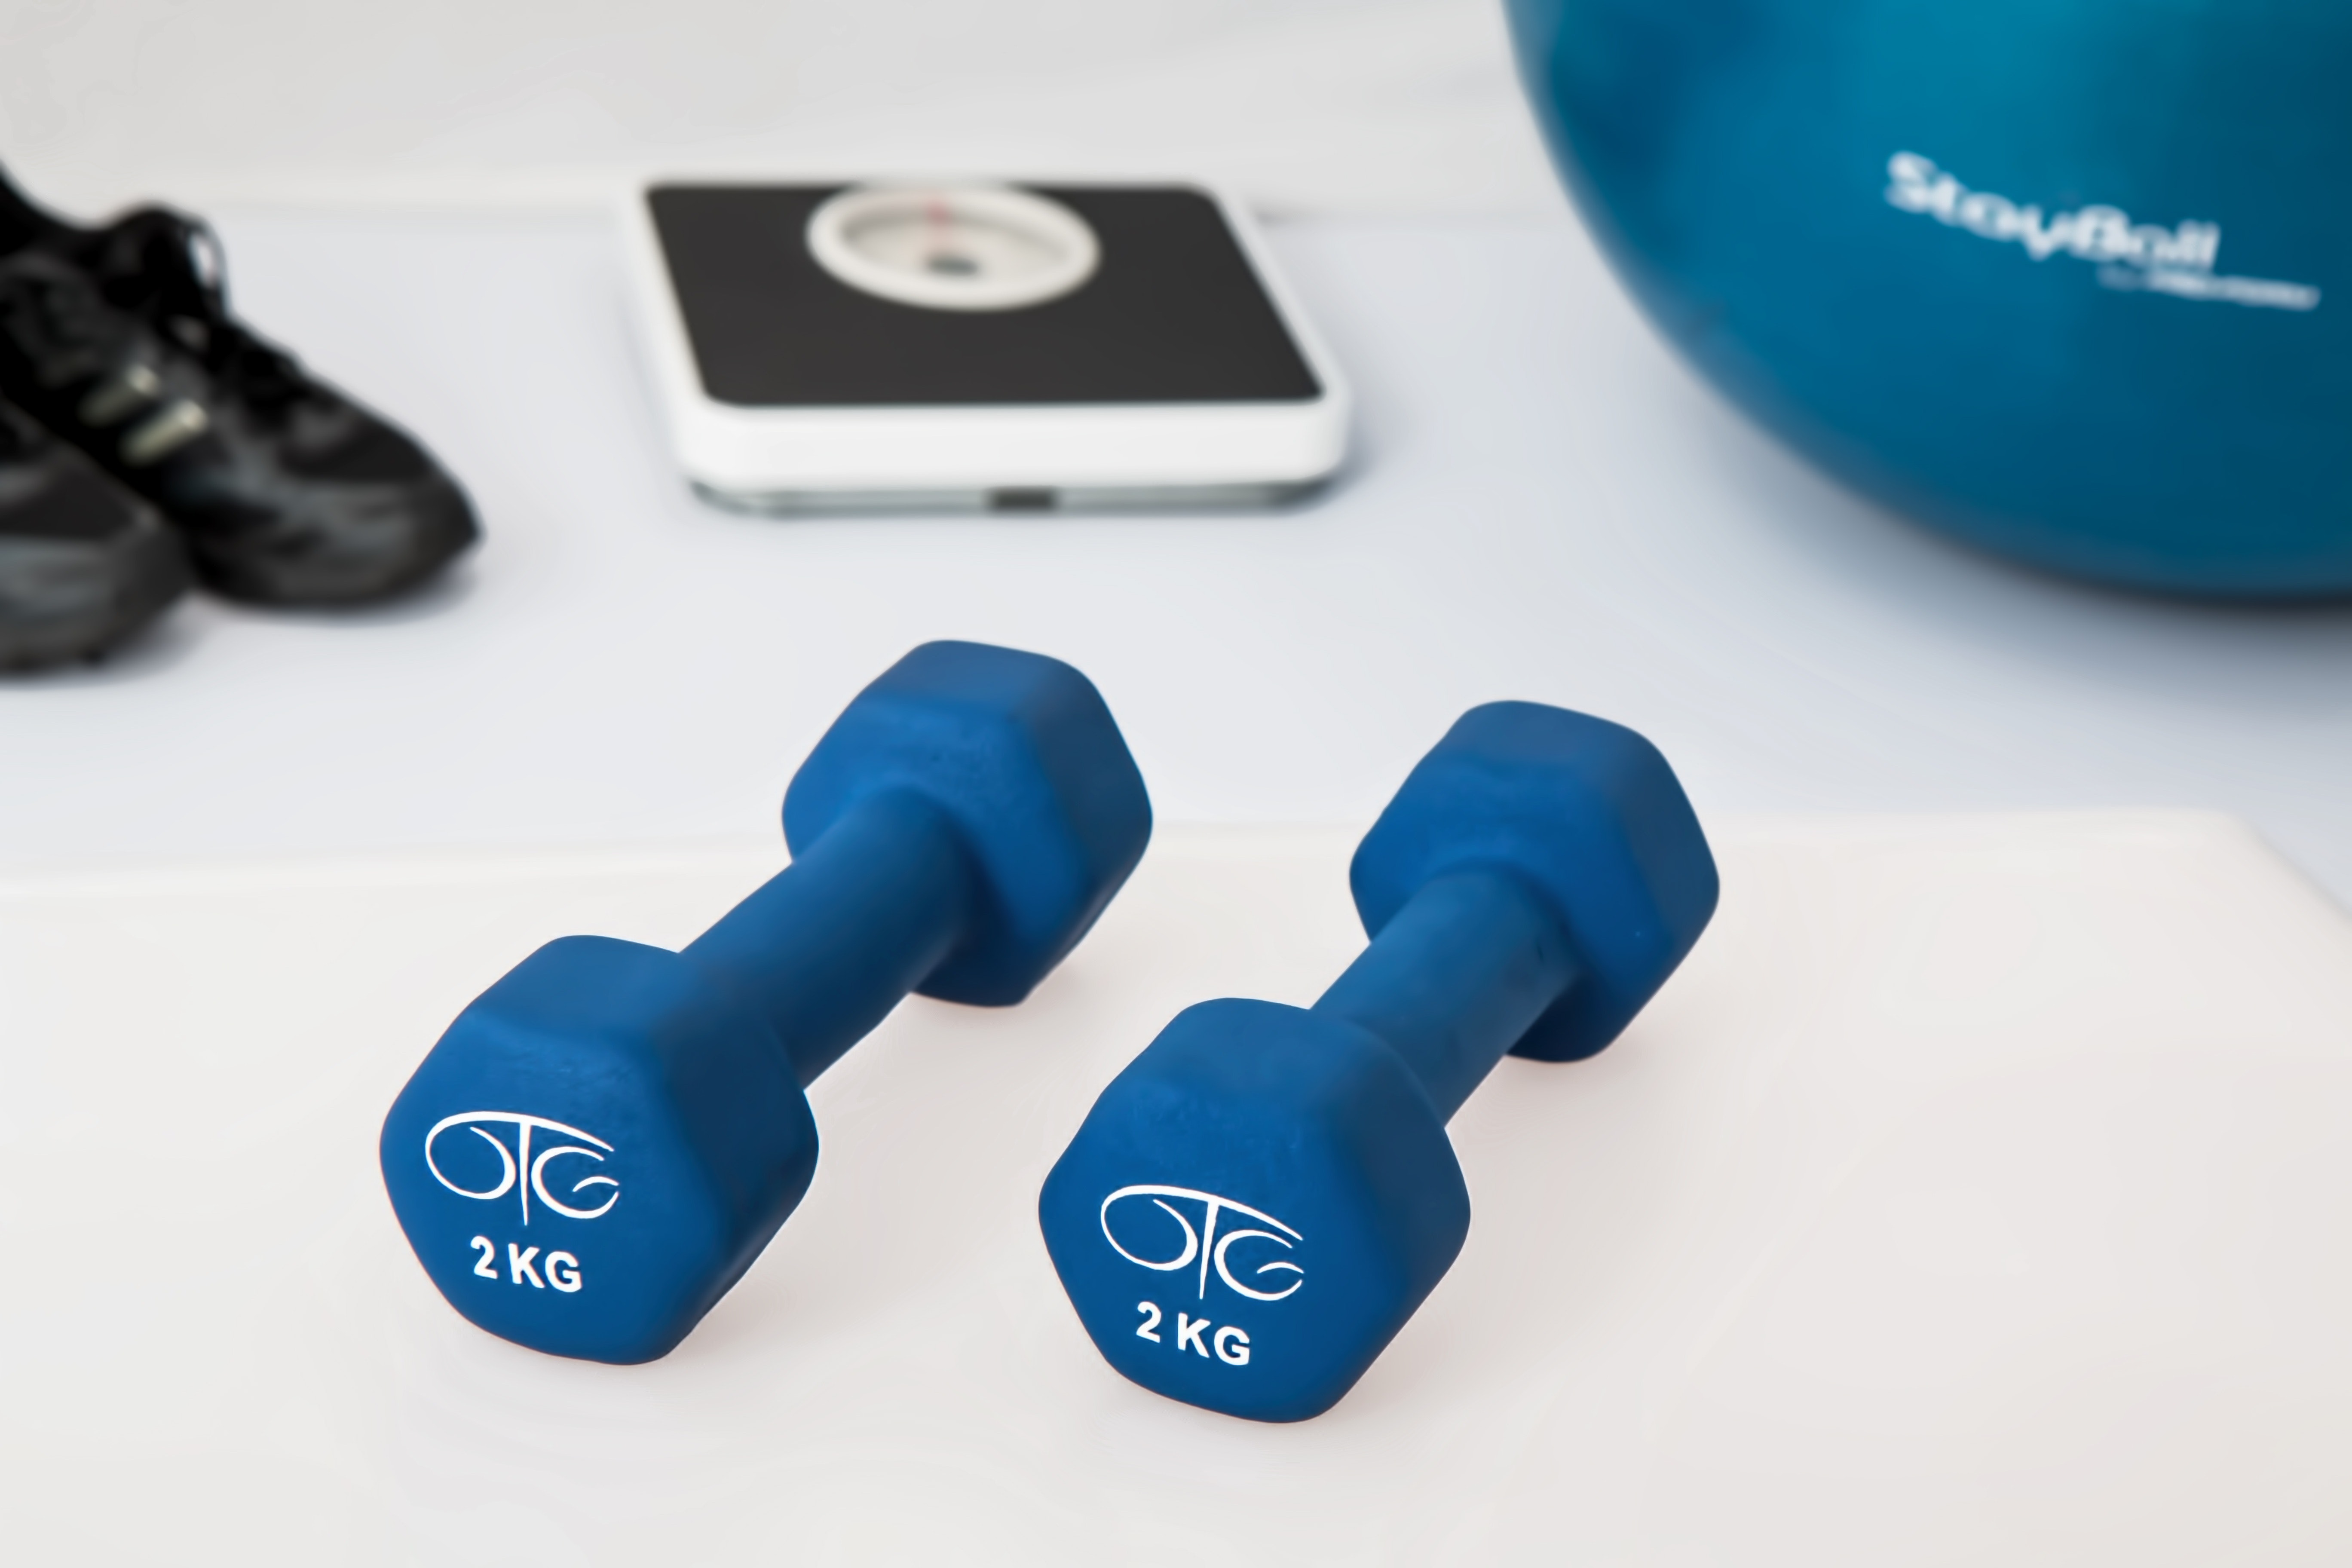 Chinese home fitness startup Fiture raises USD 6 million from Sequoia Capital China